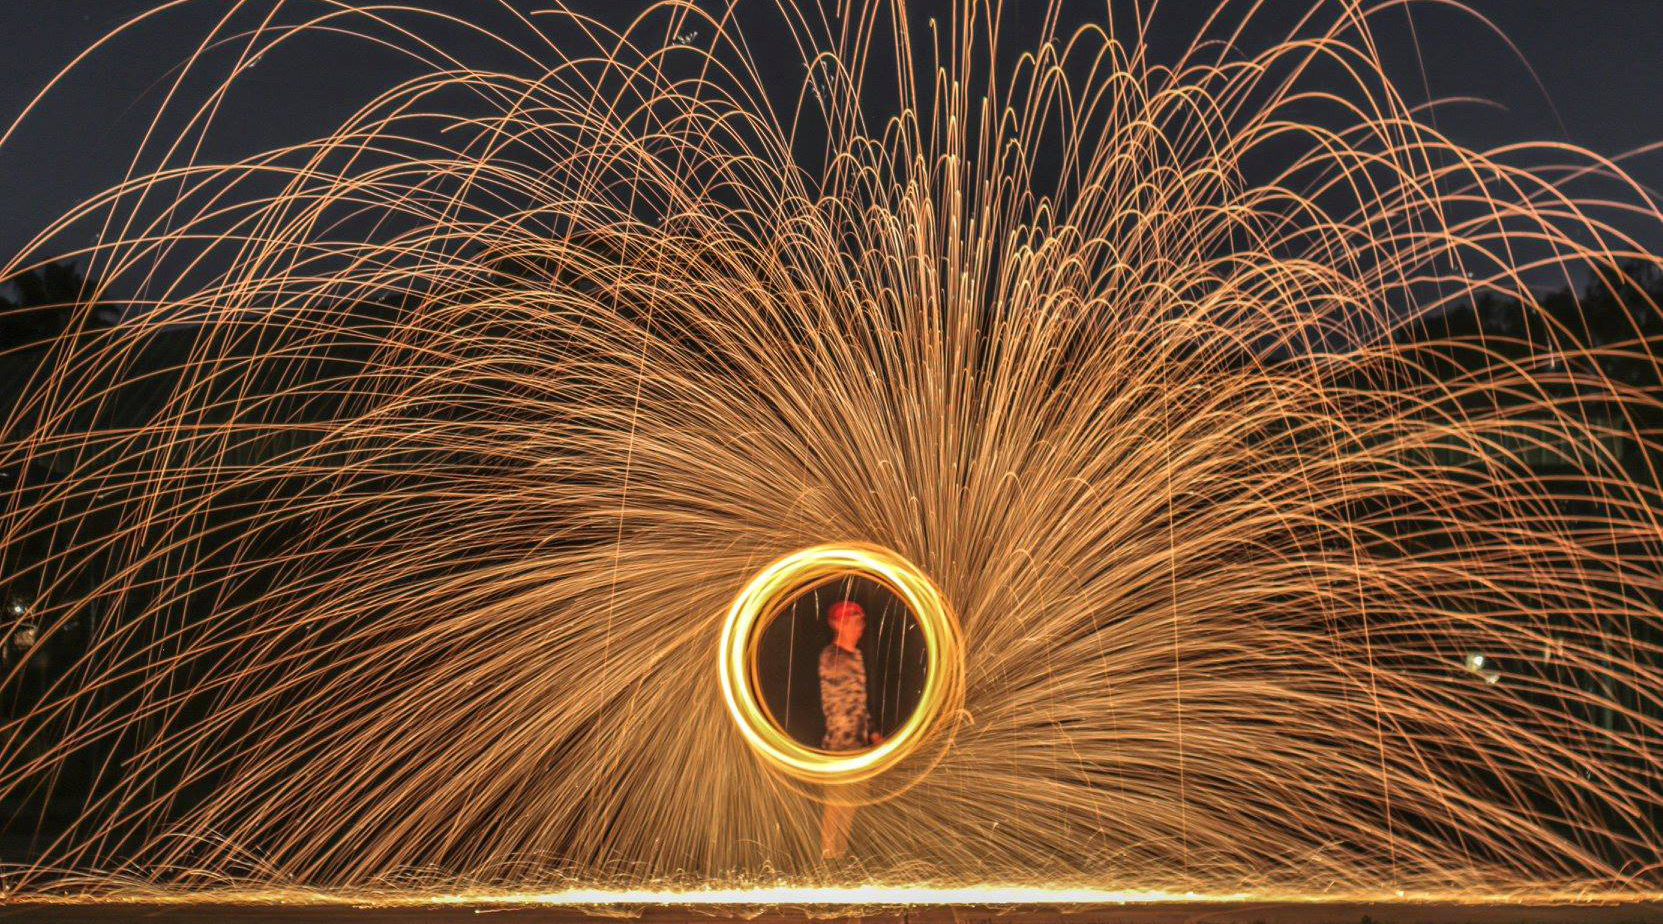 Lighting steel wool on fire and swinging it in circles to create an elaborate display of light